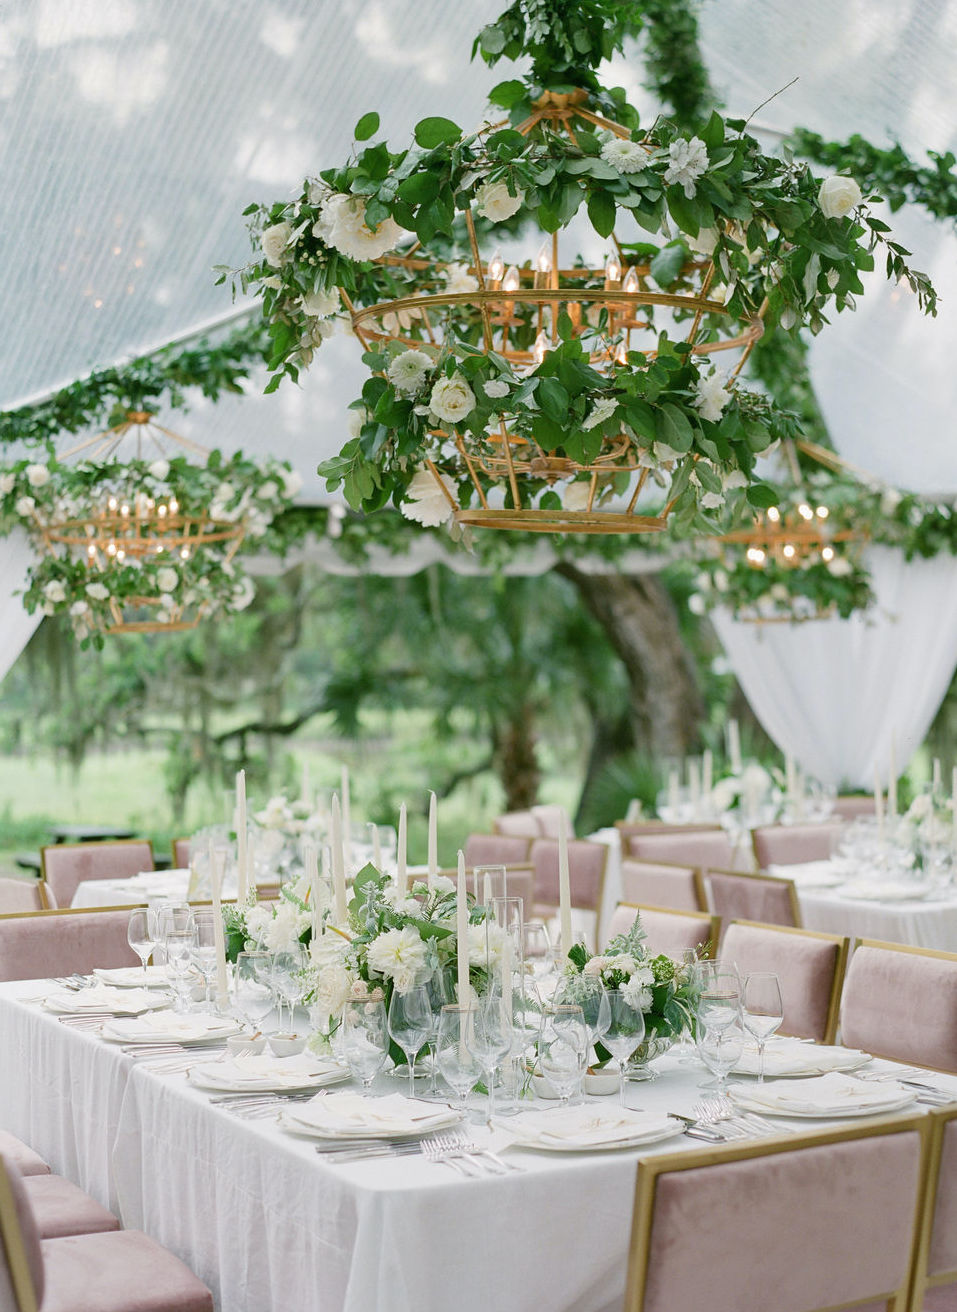 Under a wedding reception tent outside in Charleston, SC with greenery on the ceiling and in the middle of the tables. Mauve seats are set around the tables.